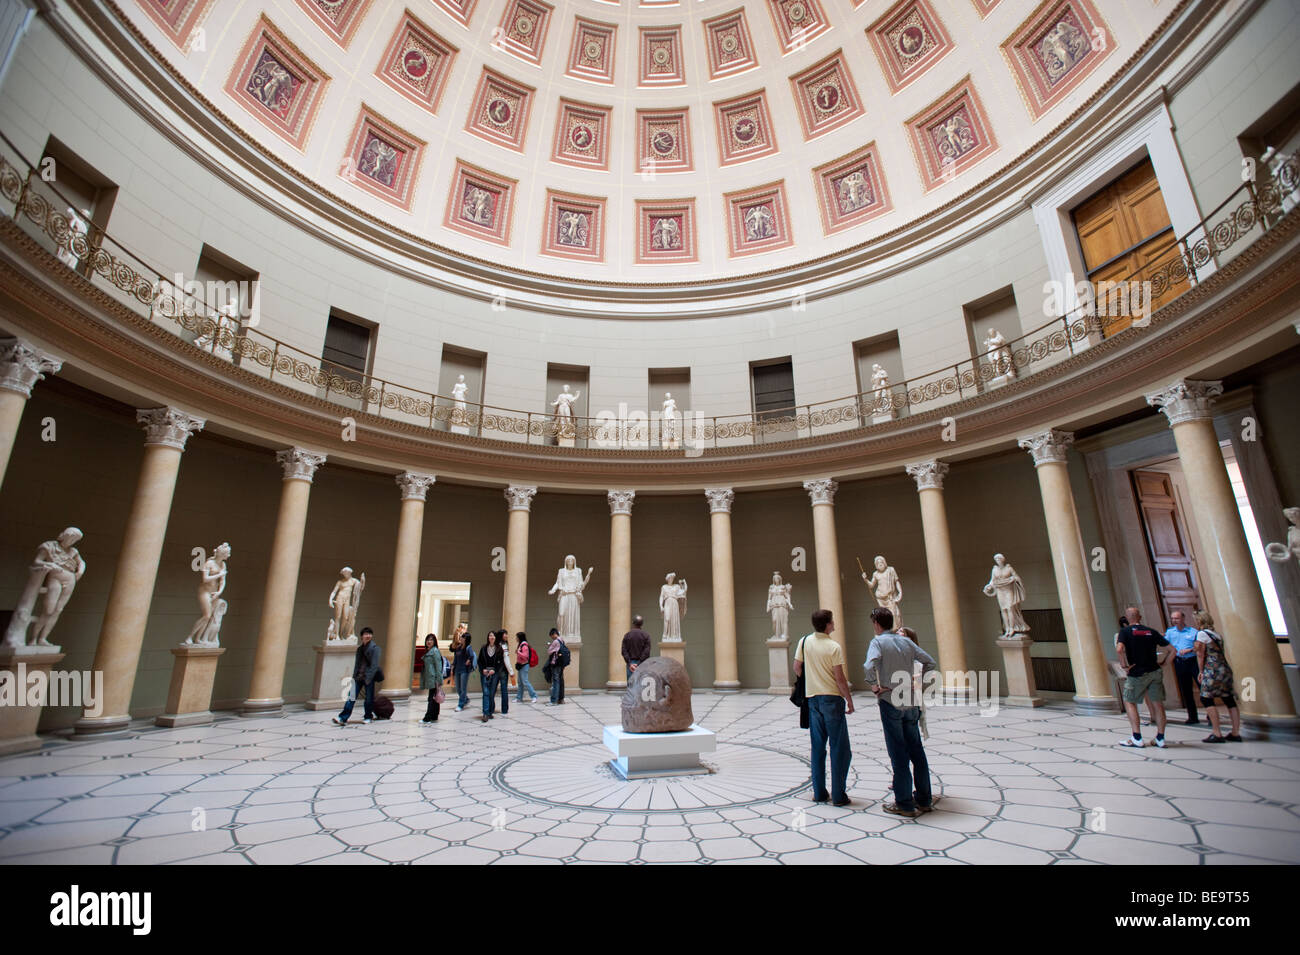 Sculptures in atrium of Altes Museum on Museumsinsel in Berlin Germany Stock Photo